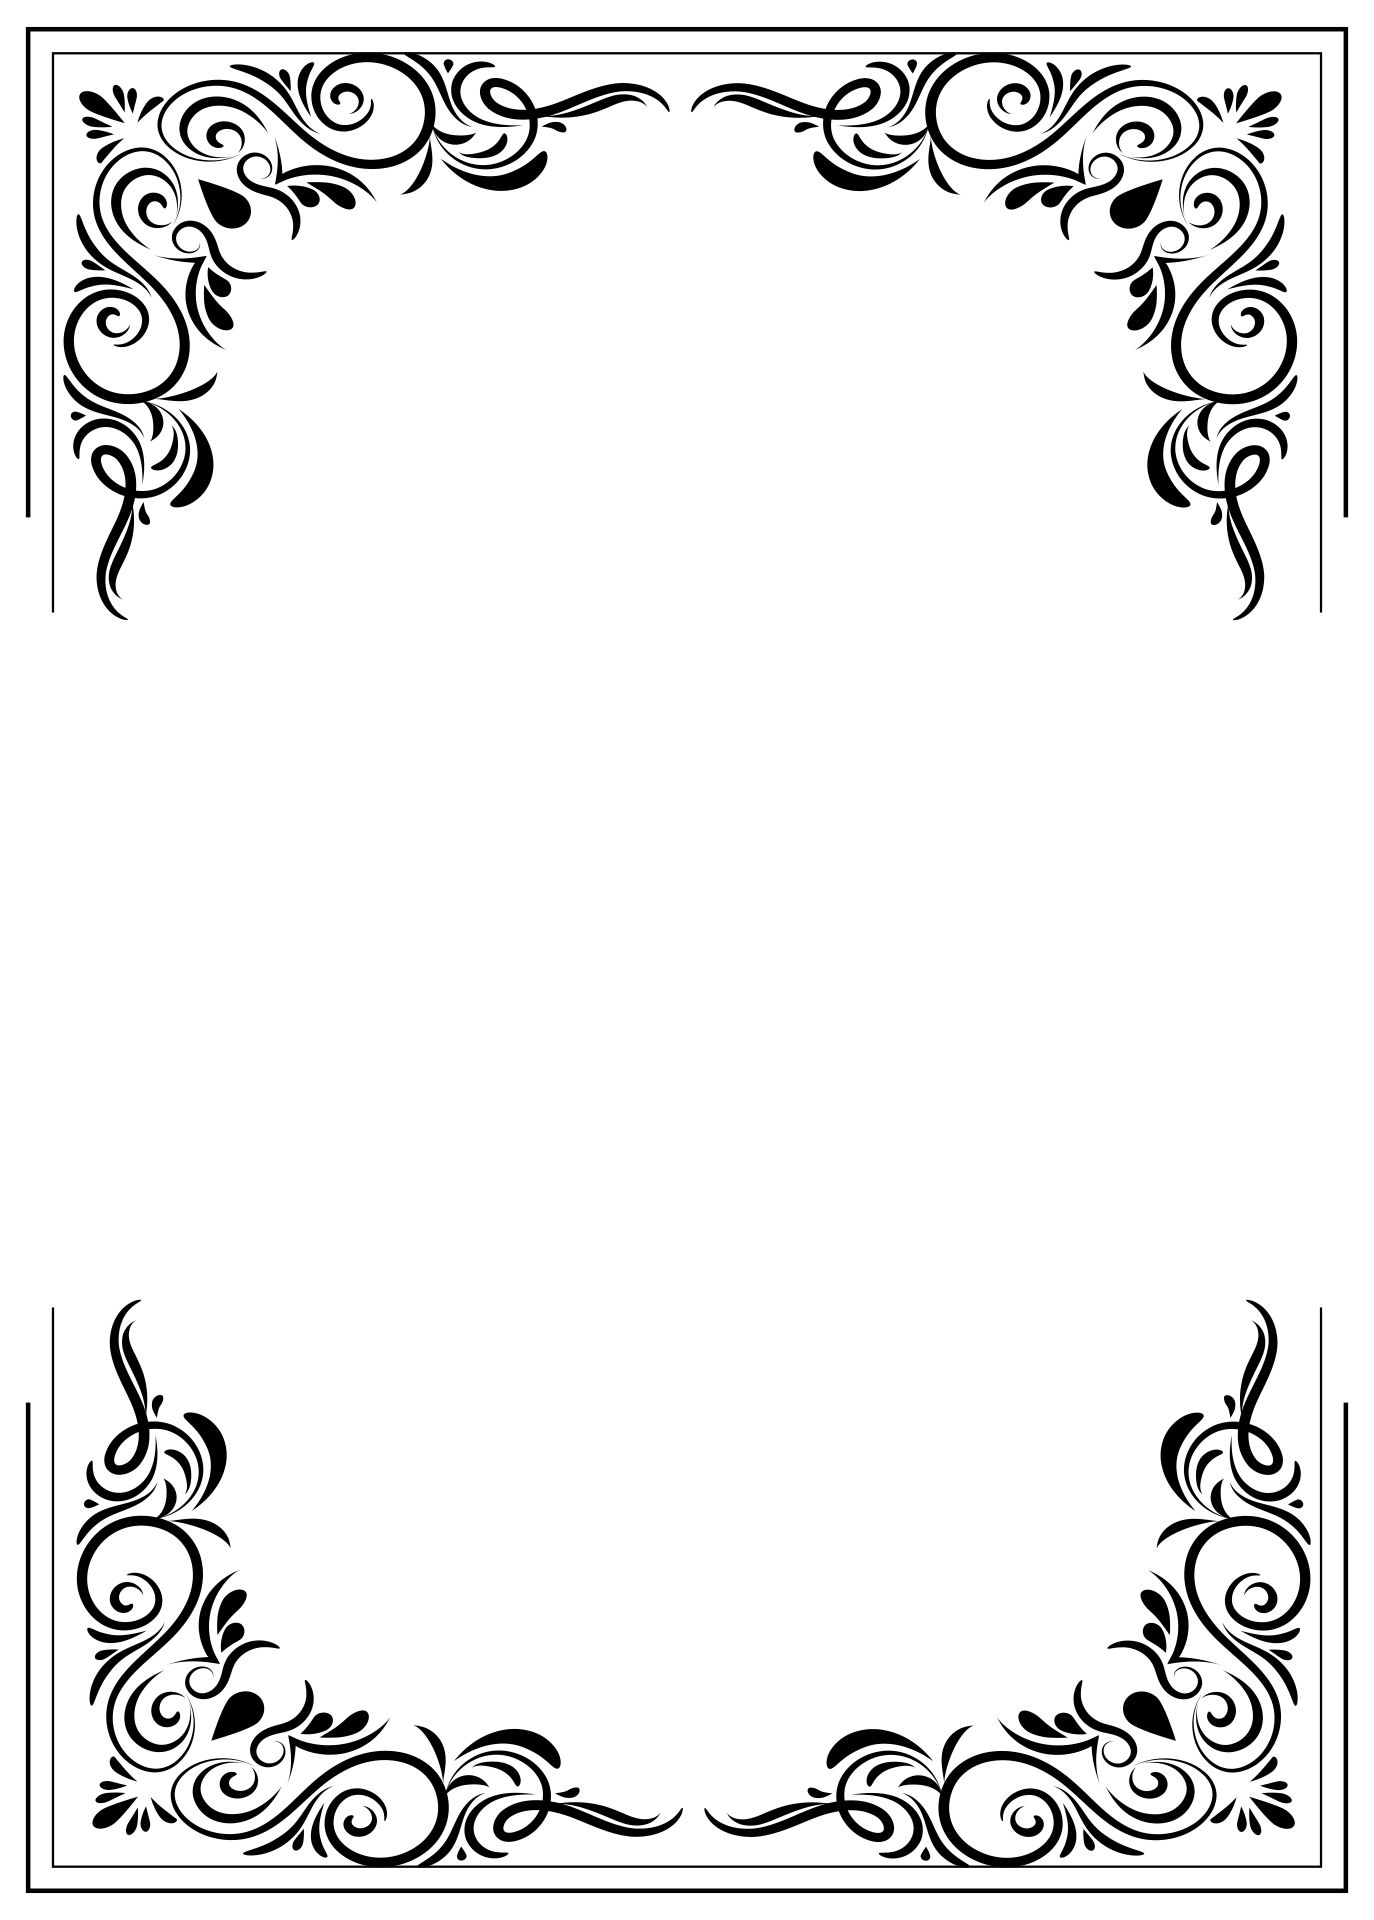 15 Best Halloween Printable Frames And Borders PDF for Free at Printablee